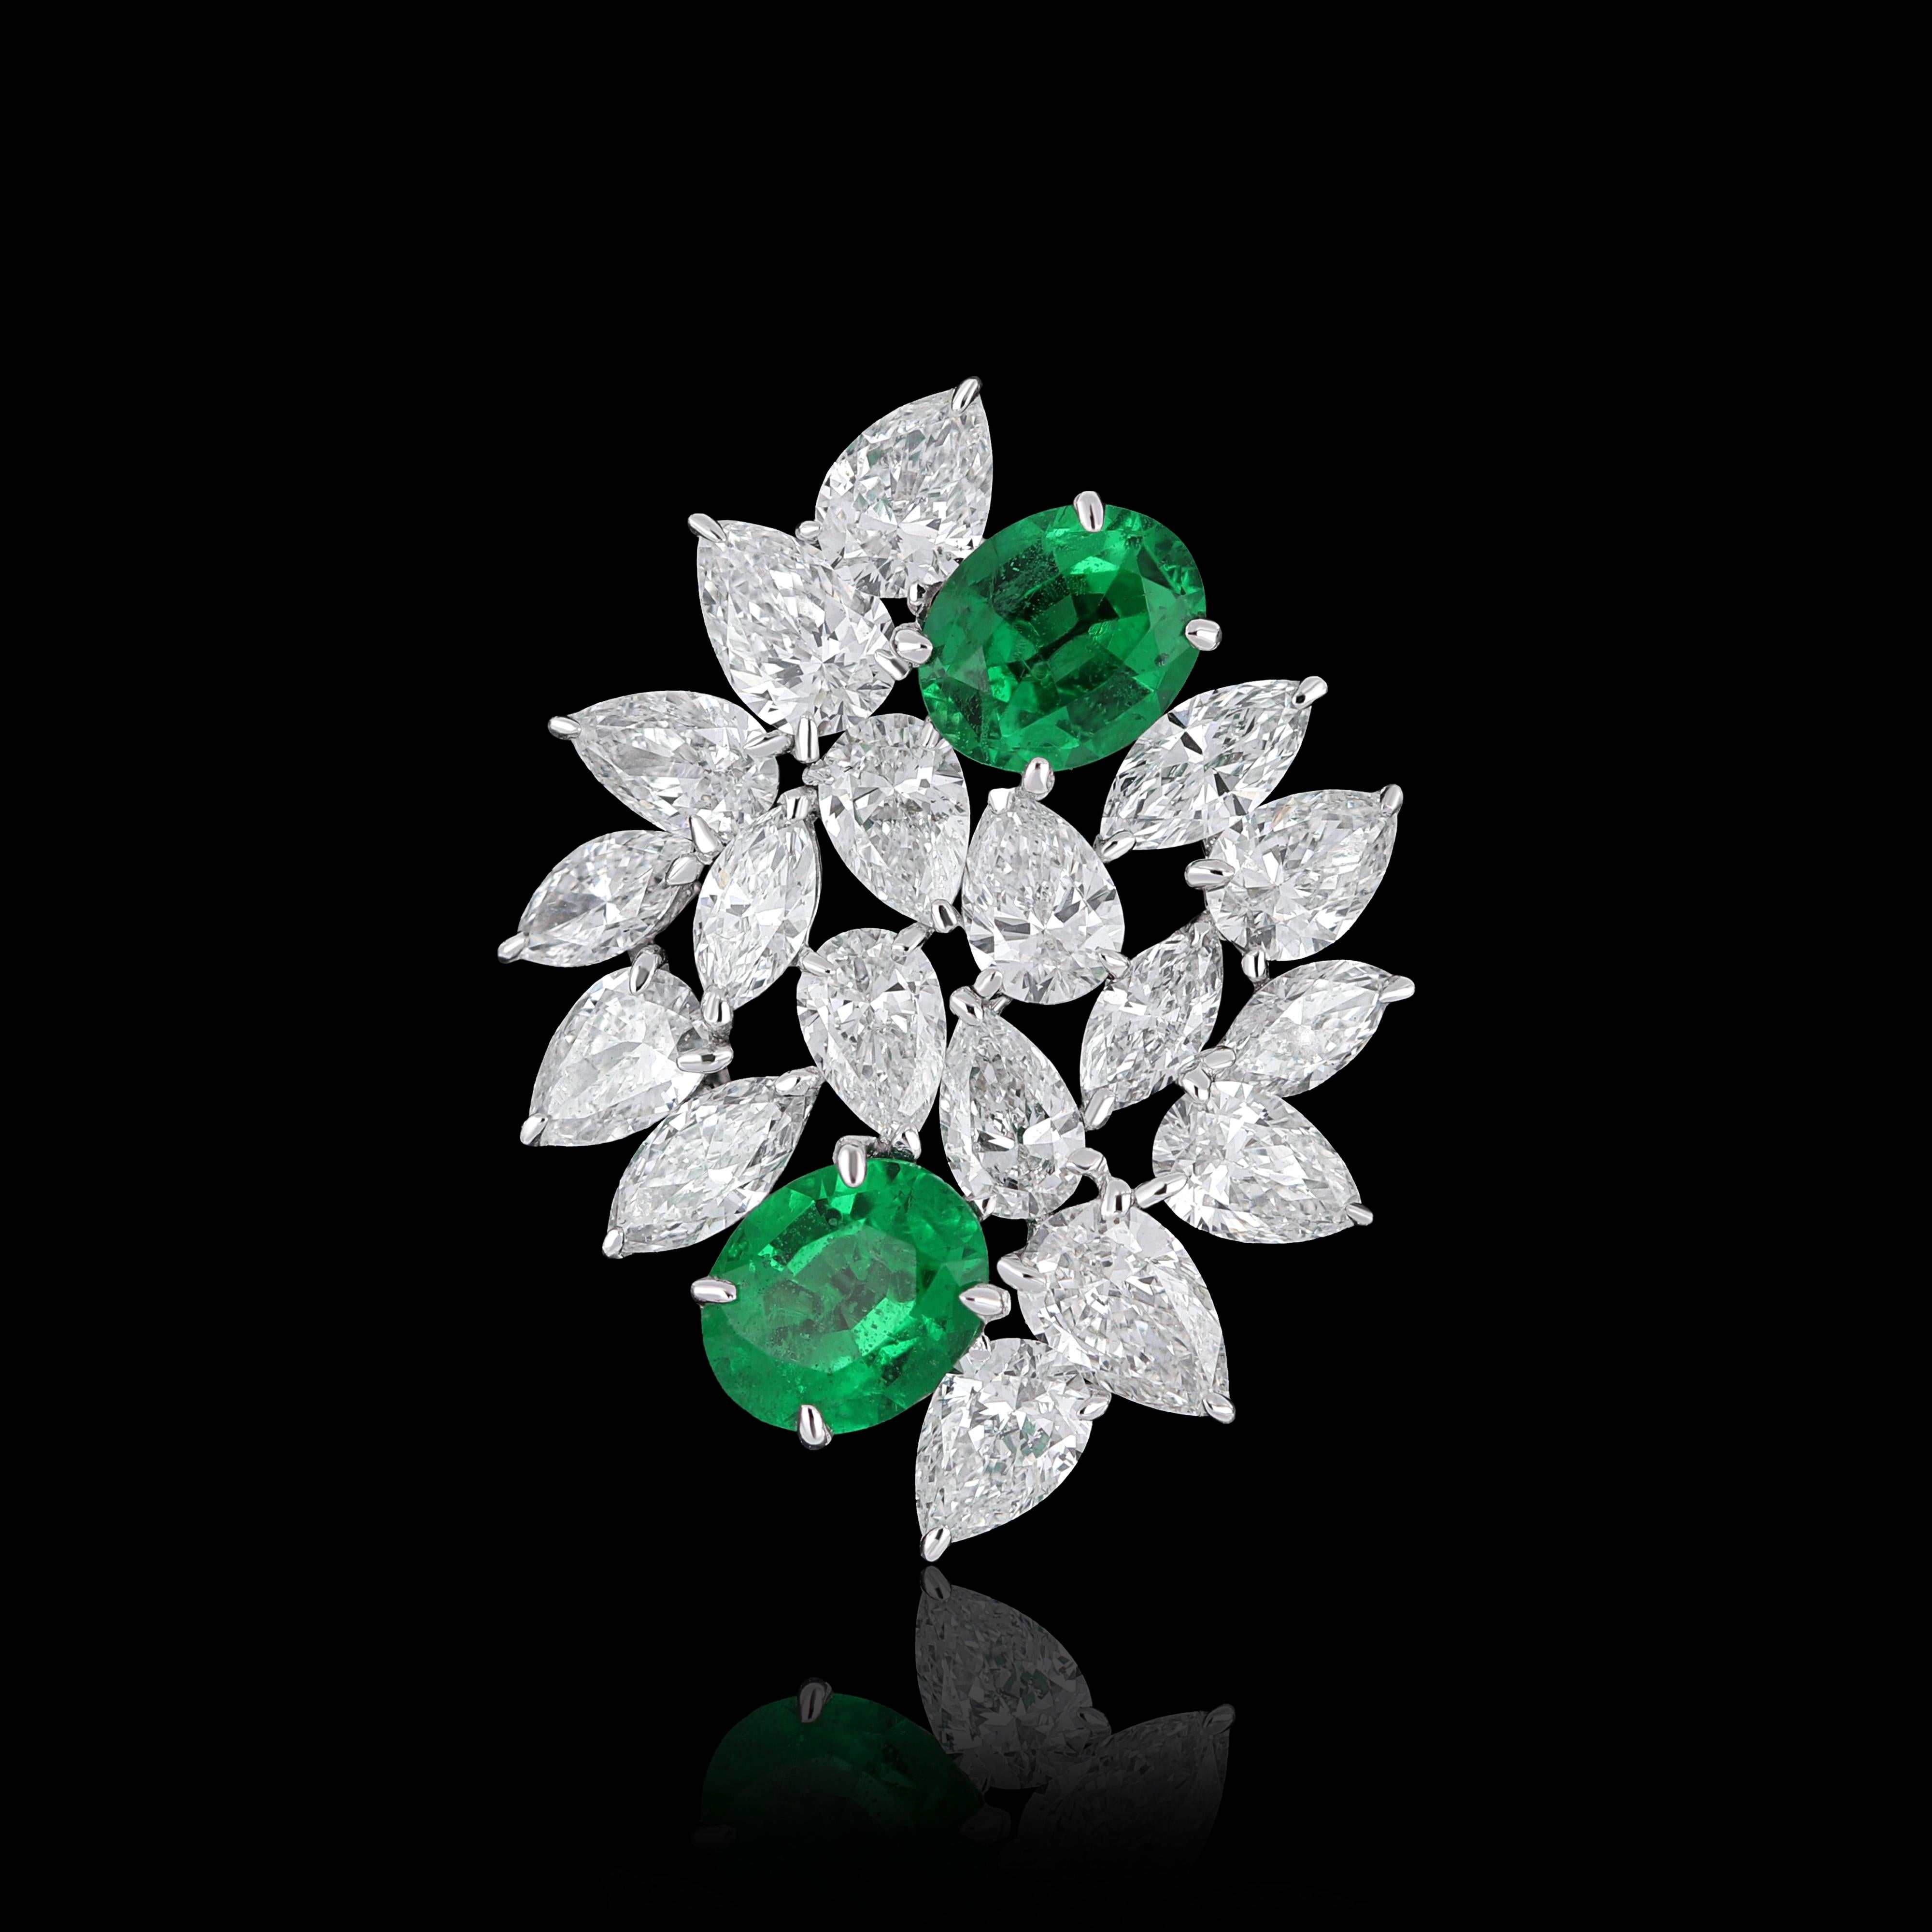 Elegant and exquisitely detailed 18 Karat White Gold Pendant, center set with 0.66 Cts .Oval Shape Emerald and micro pave set Diamonds, weighing approx. 1.51 Cts Beautifully Hand crafted in 18 Karat White Gold.

Stone Detail:
Emerald: 5x4MM

Stone